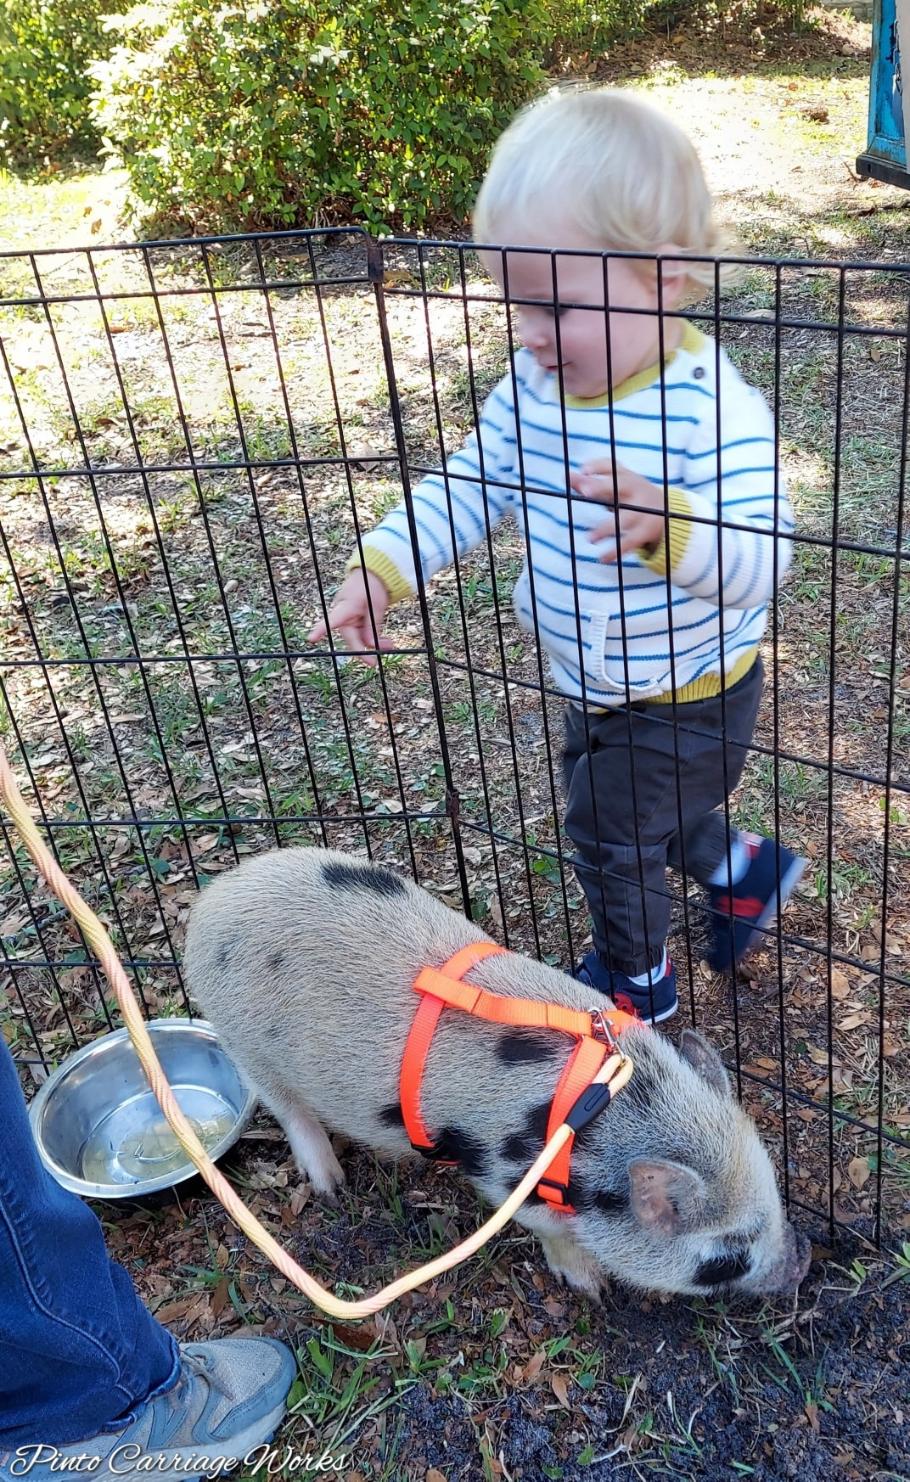 Cute little kid saying hello to our pig at a petting zoo in Callahan, FL.